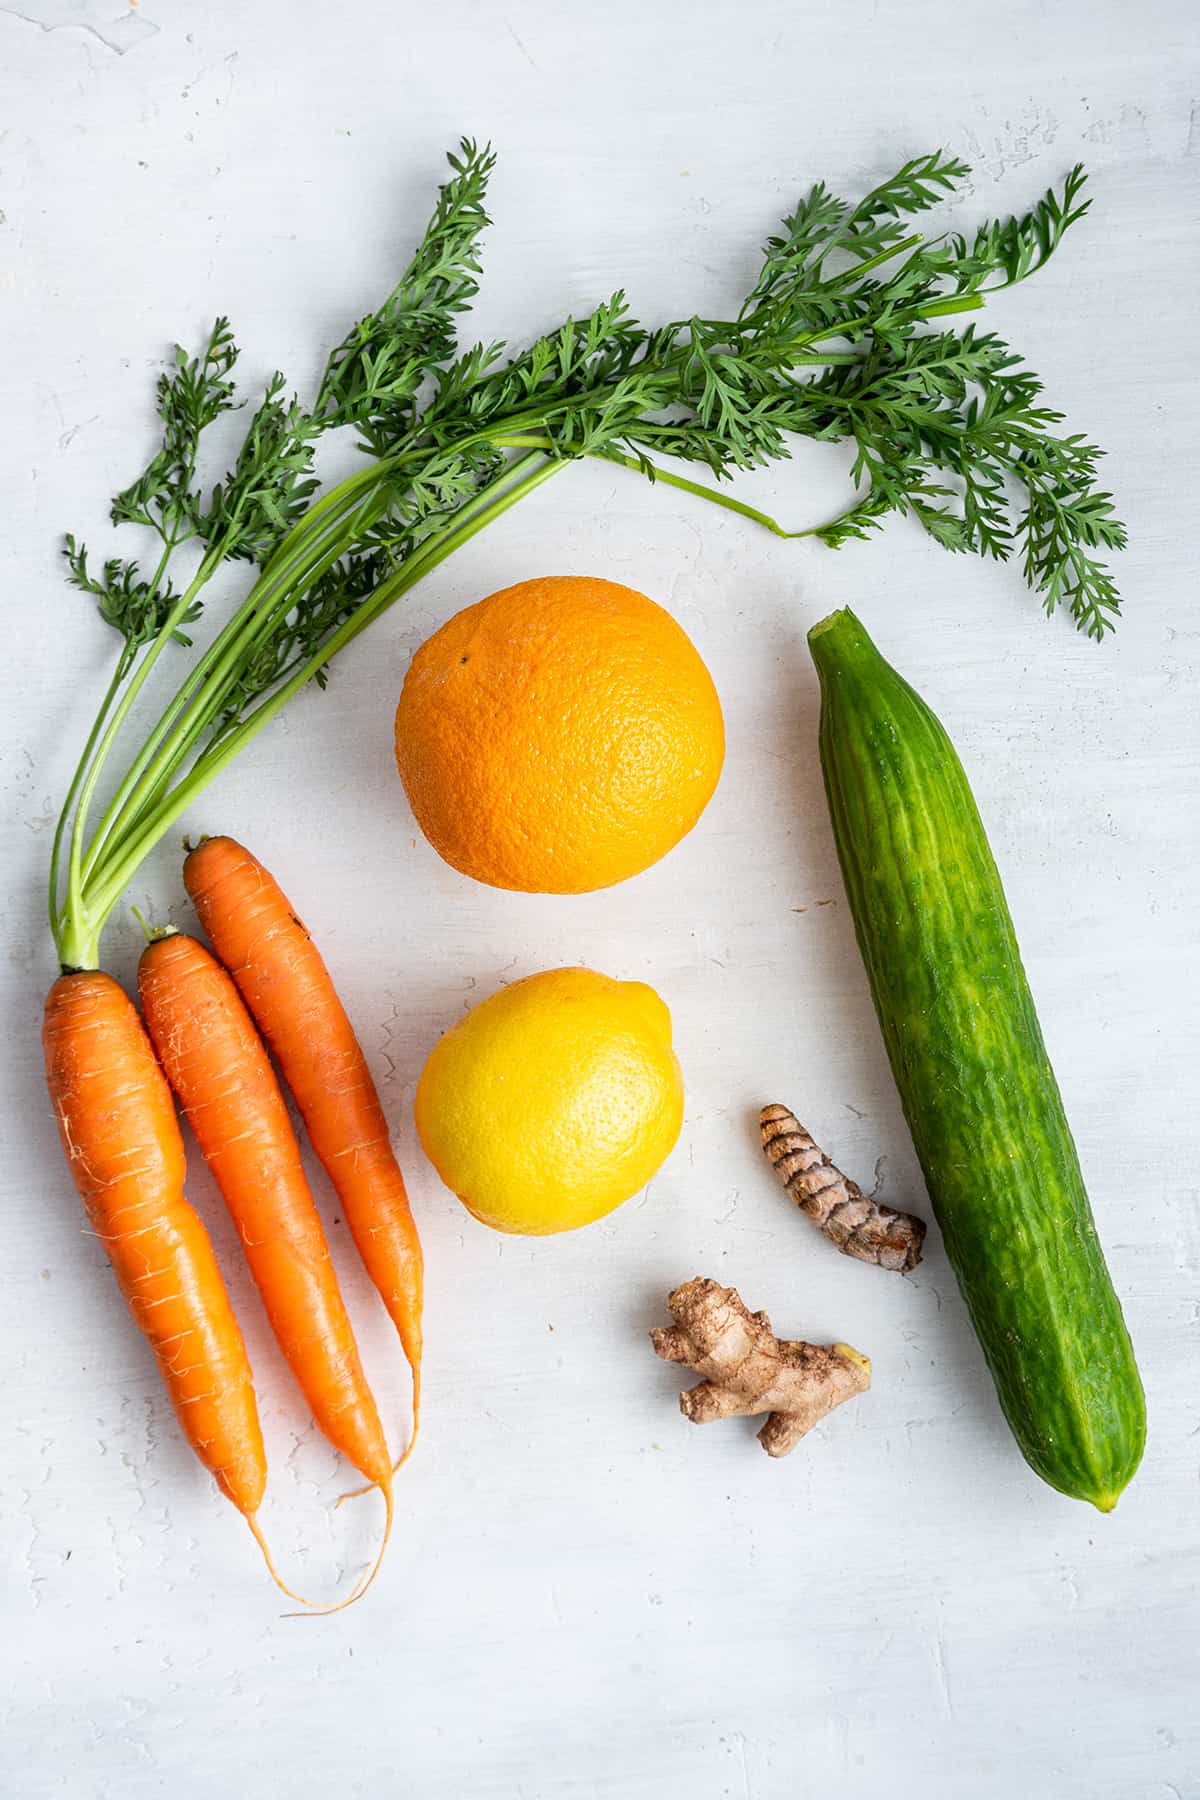 Overhead view of ingredients for carrot juice